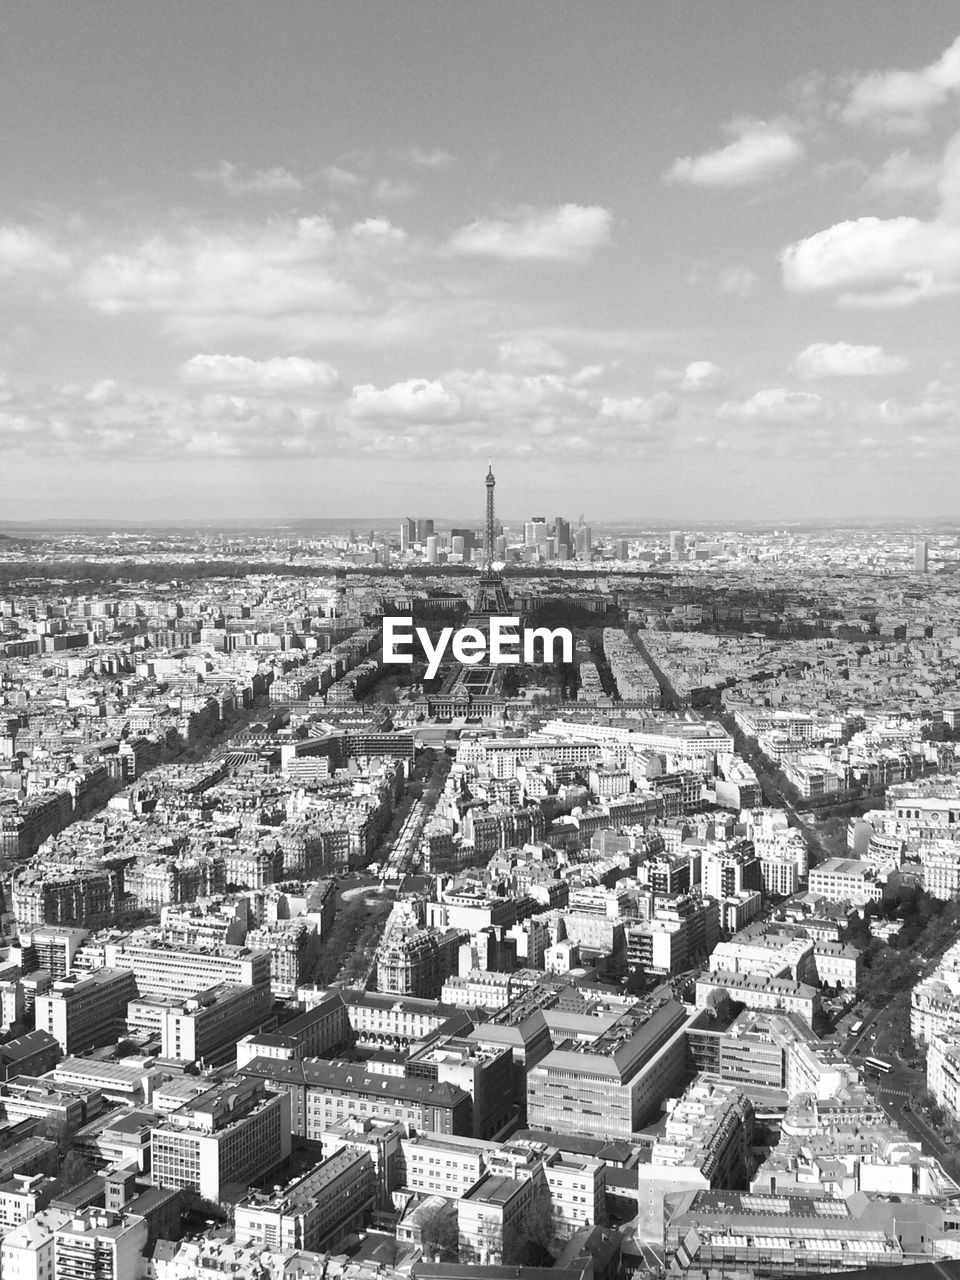 Elevated view of eiffel tower